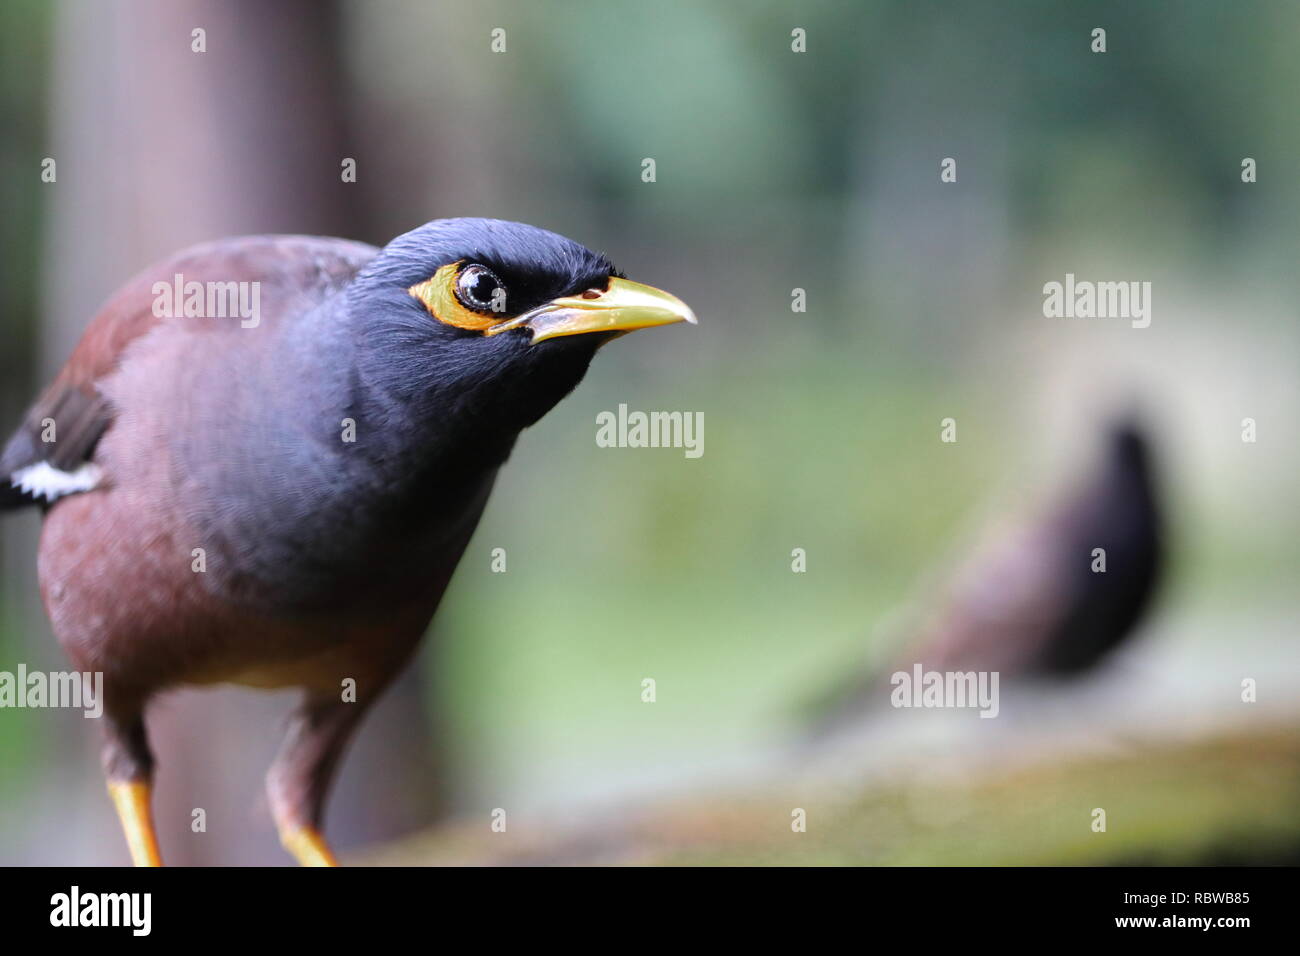 A common myna bird looking at you and sitting on a wall Stock Photo